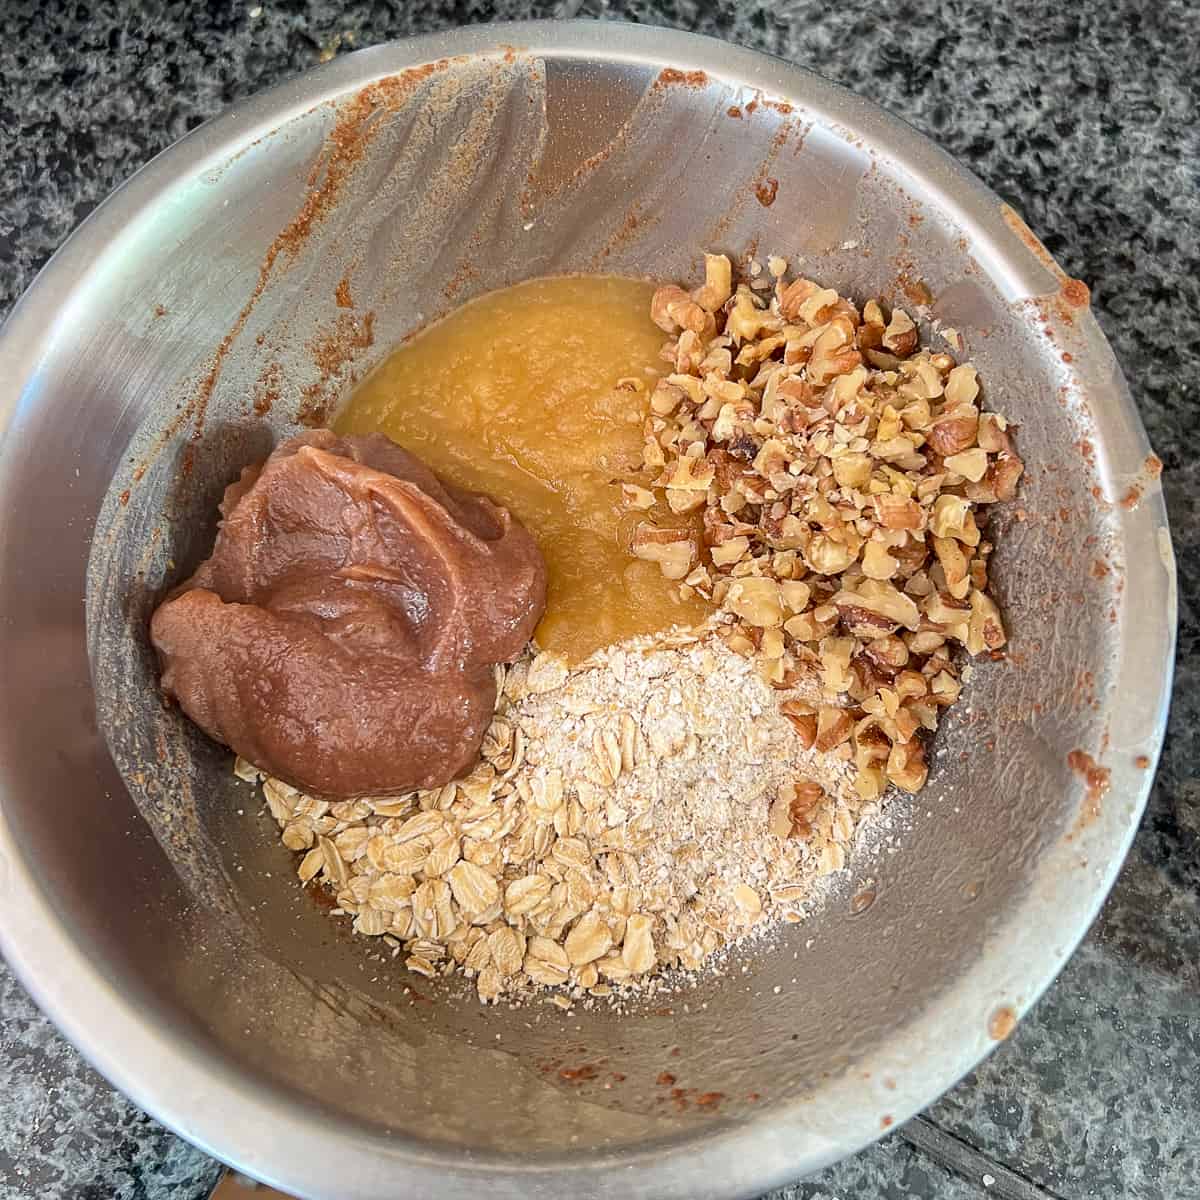 top view of a mixing bowl with date syrup, oats, walnuts and apple sauce